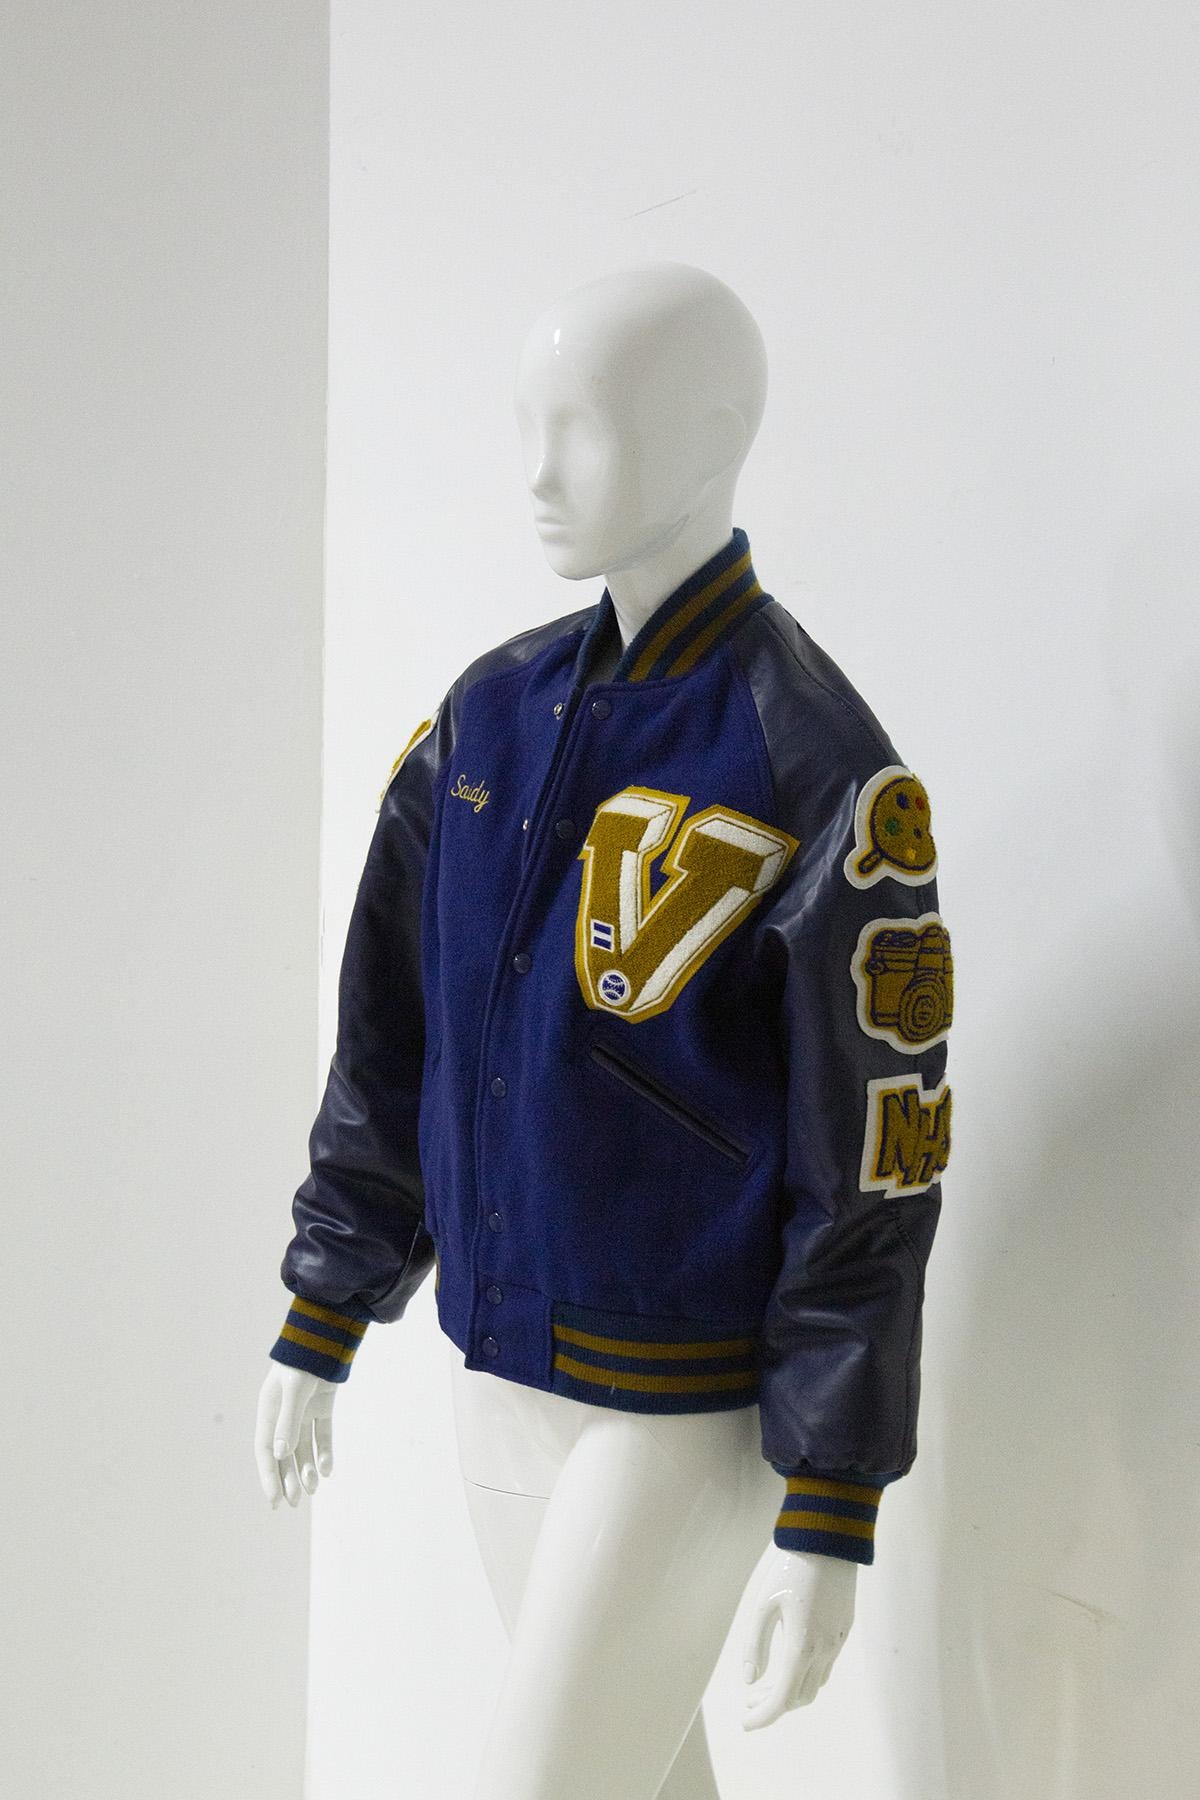 American fashionable jacket from the 1990s Varsity model . This jacket is the classic American model used in high school or college. The manufacture is Jackson. The vest is made with vinyl and pvc sleeves in blue color, while the torso part i.e.